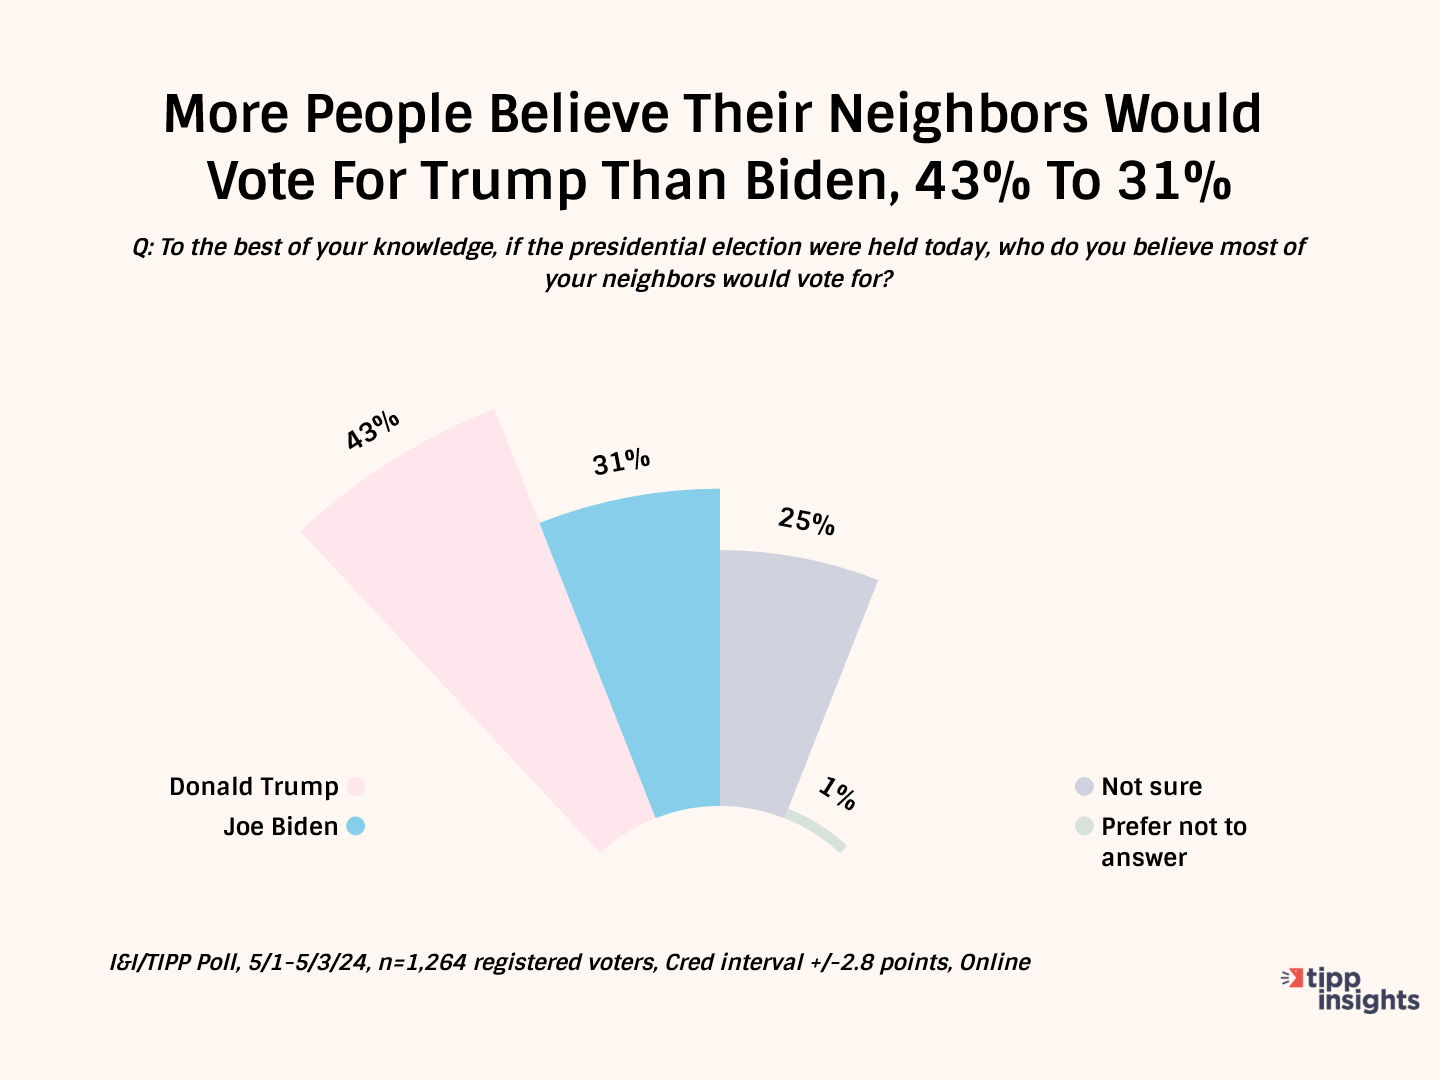 More-People-Believe-Their-Neighbors-Would-Vote-For-Trump-Than-Biden--43--To-31-.png